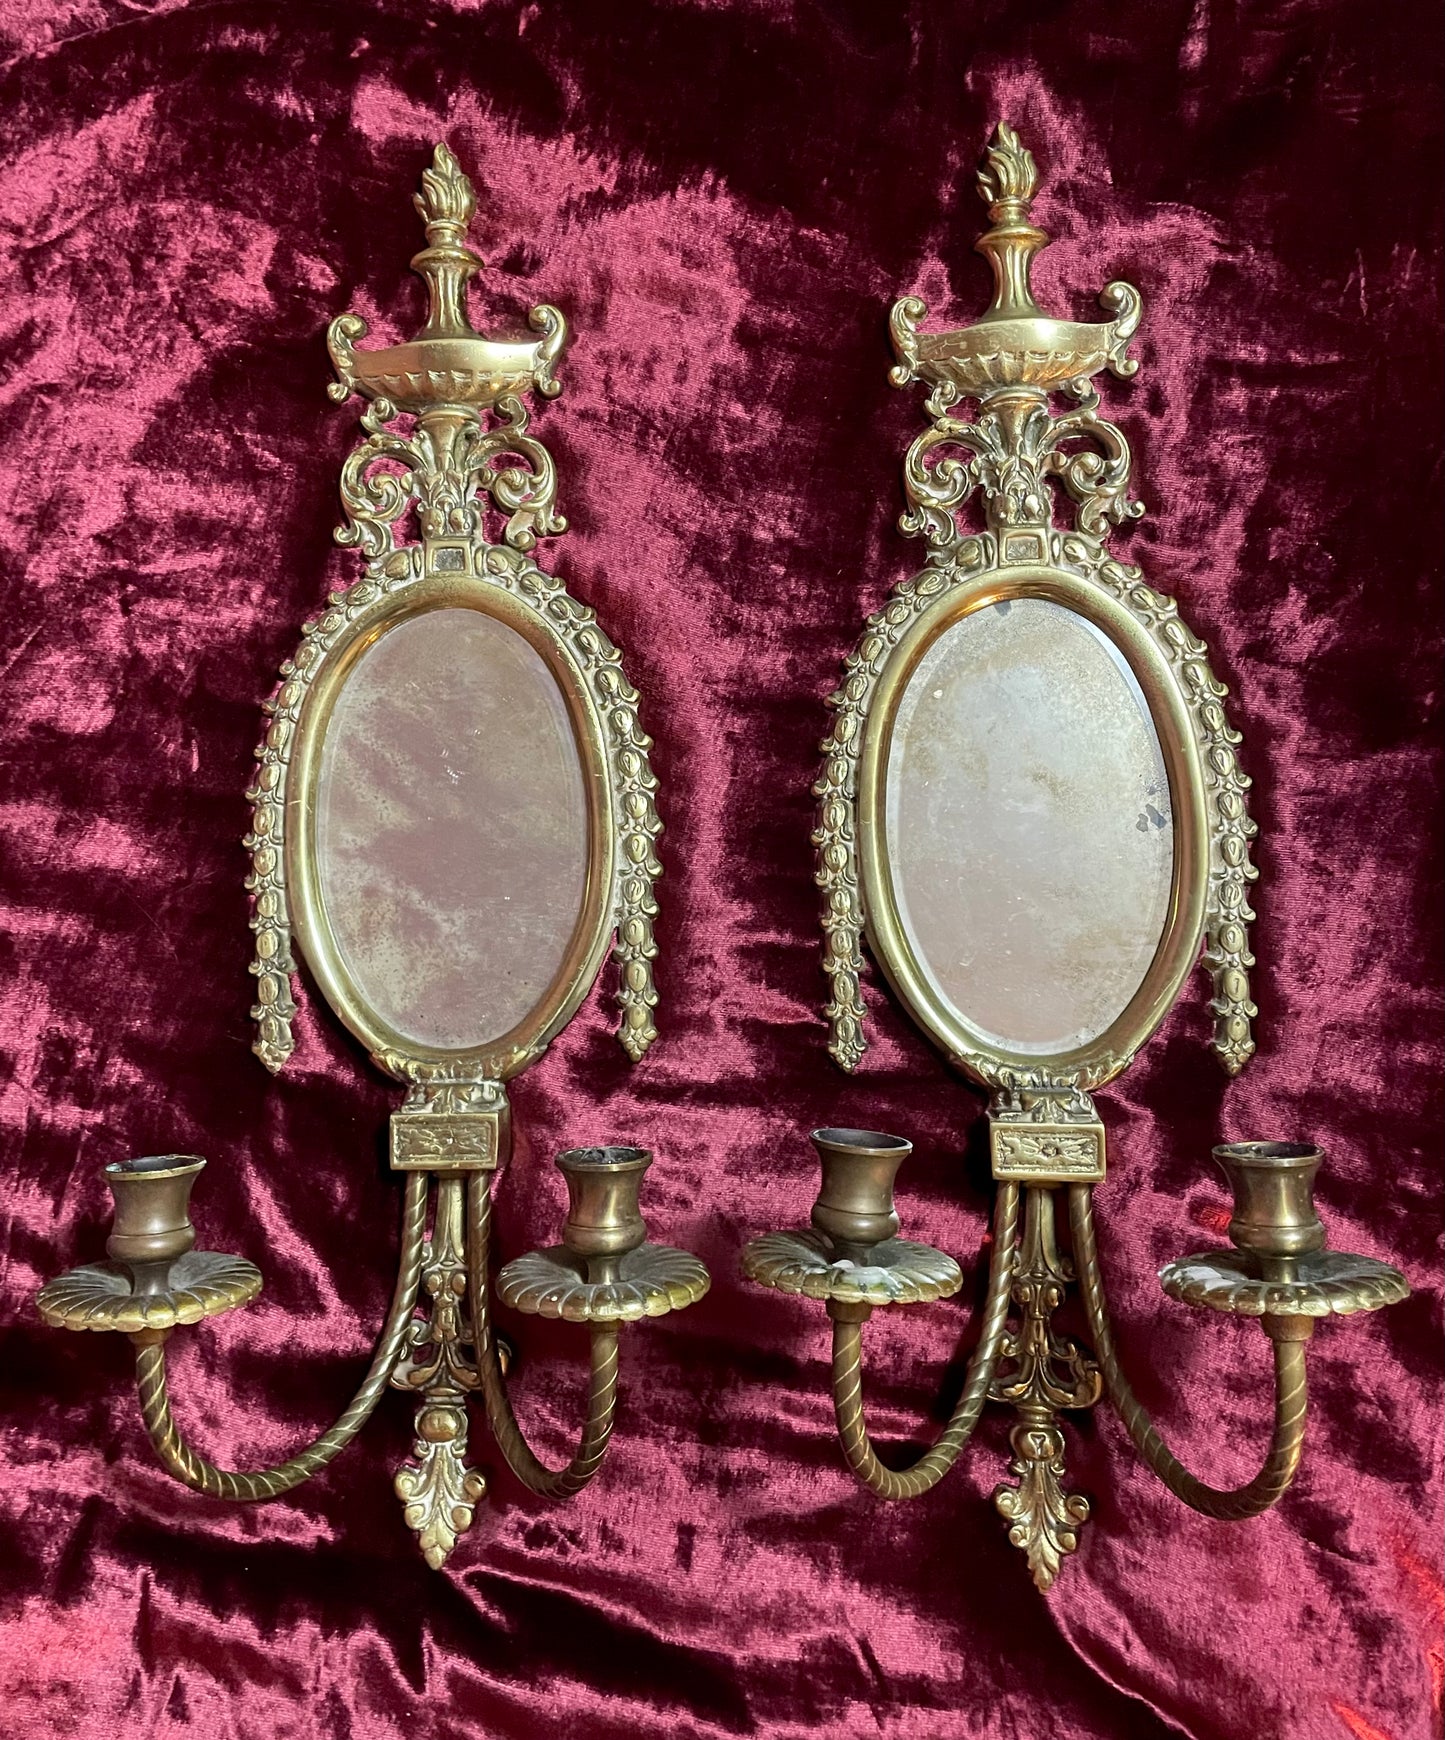 Vintage Baroque Revival Sconces with Mirrors & Candleholders